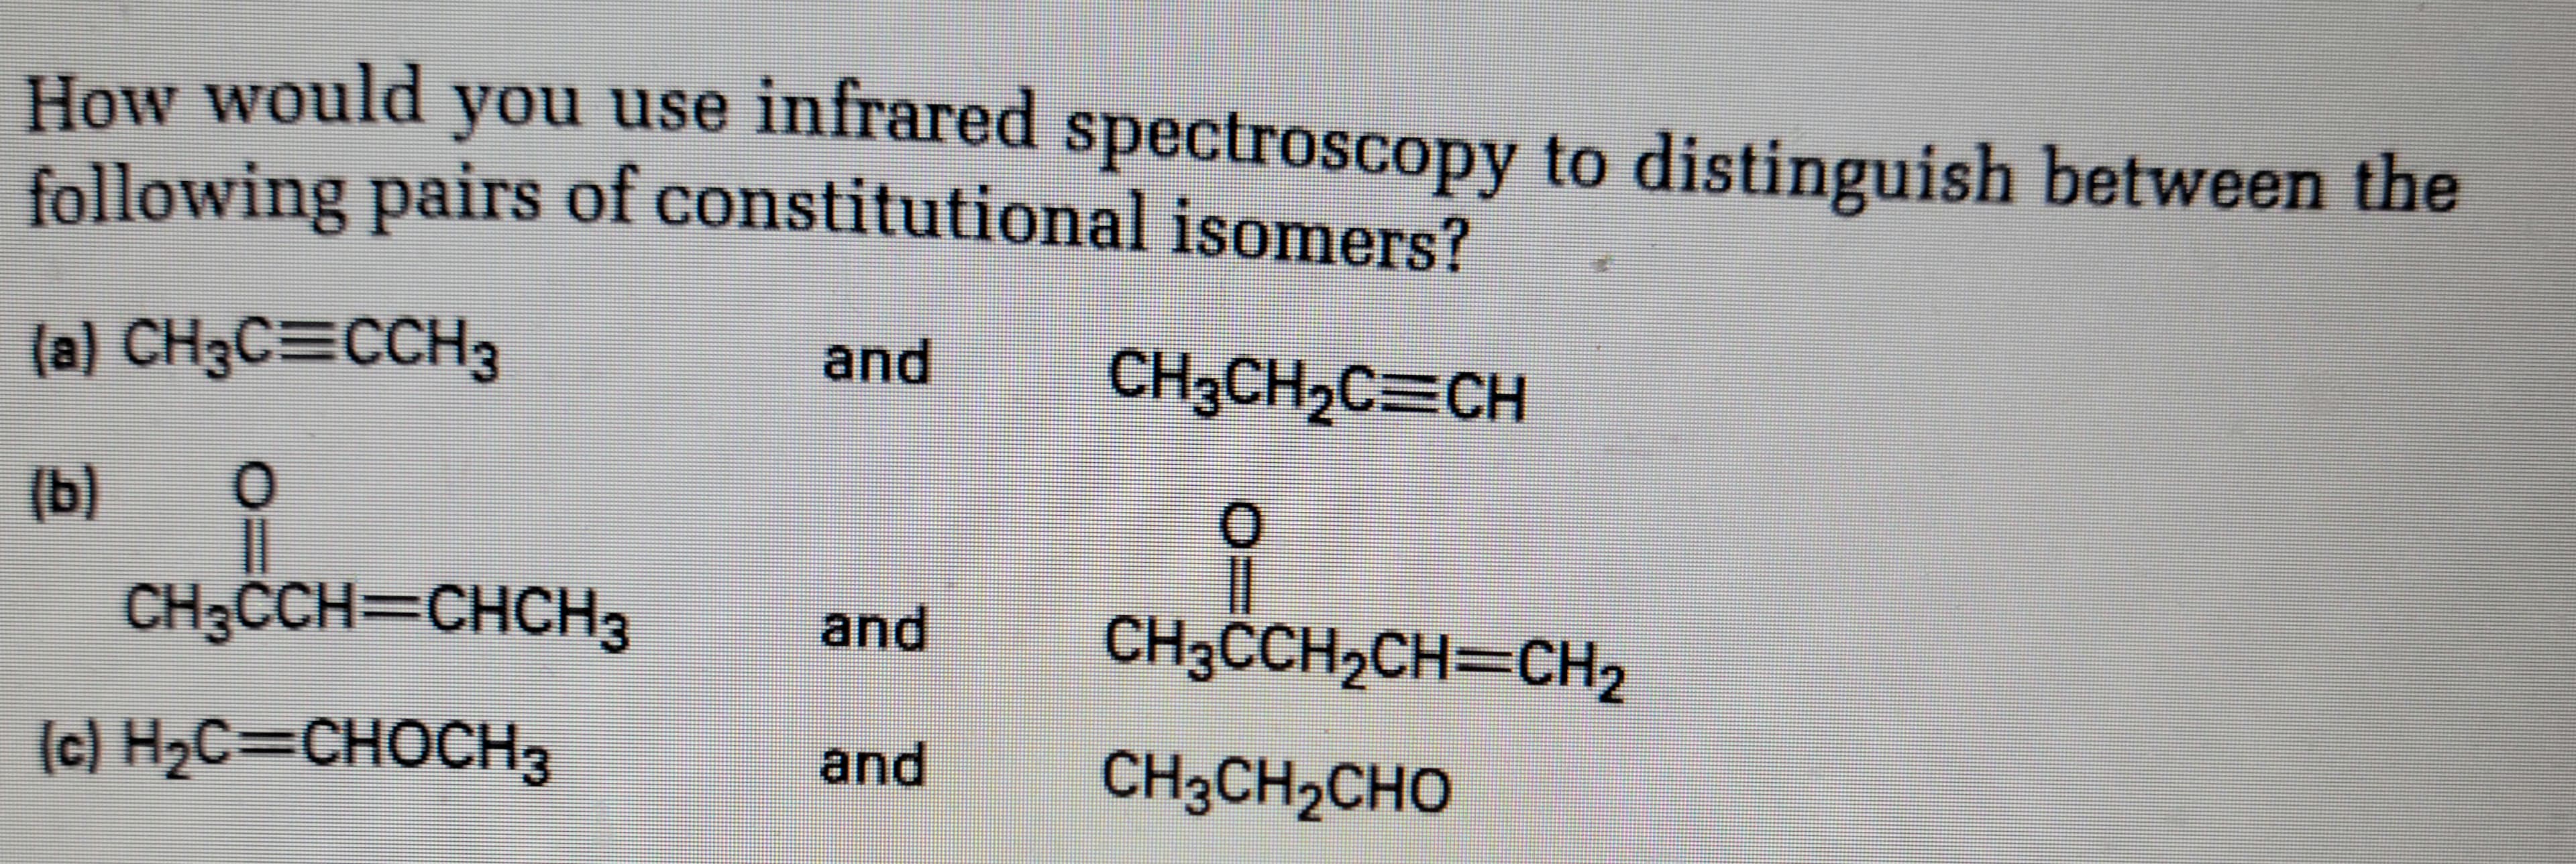 How would you use infrared spectroscopy to distinguish between the
following pairs of constitutional isomers?
and
CH3CH₂C=CH
(a) CH3C=CCH3
(b) 0
||
CH3CCH=CHCH3
(c) H₂C=CHOCH 3
and
and
0
||
CH3CCH₂CH=CH₂
CH3CH2CHO